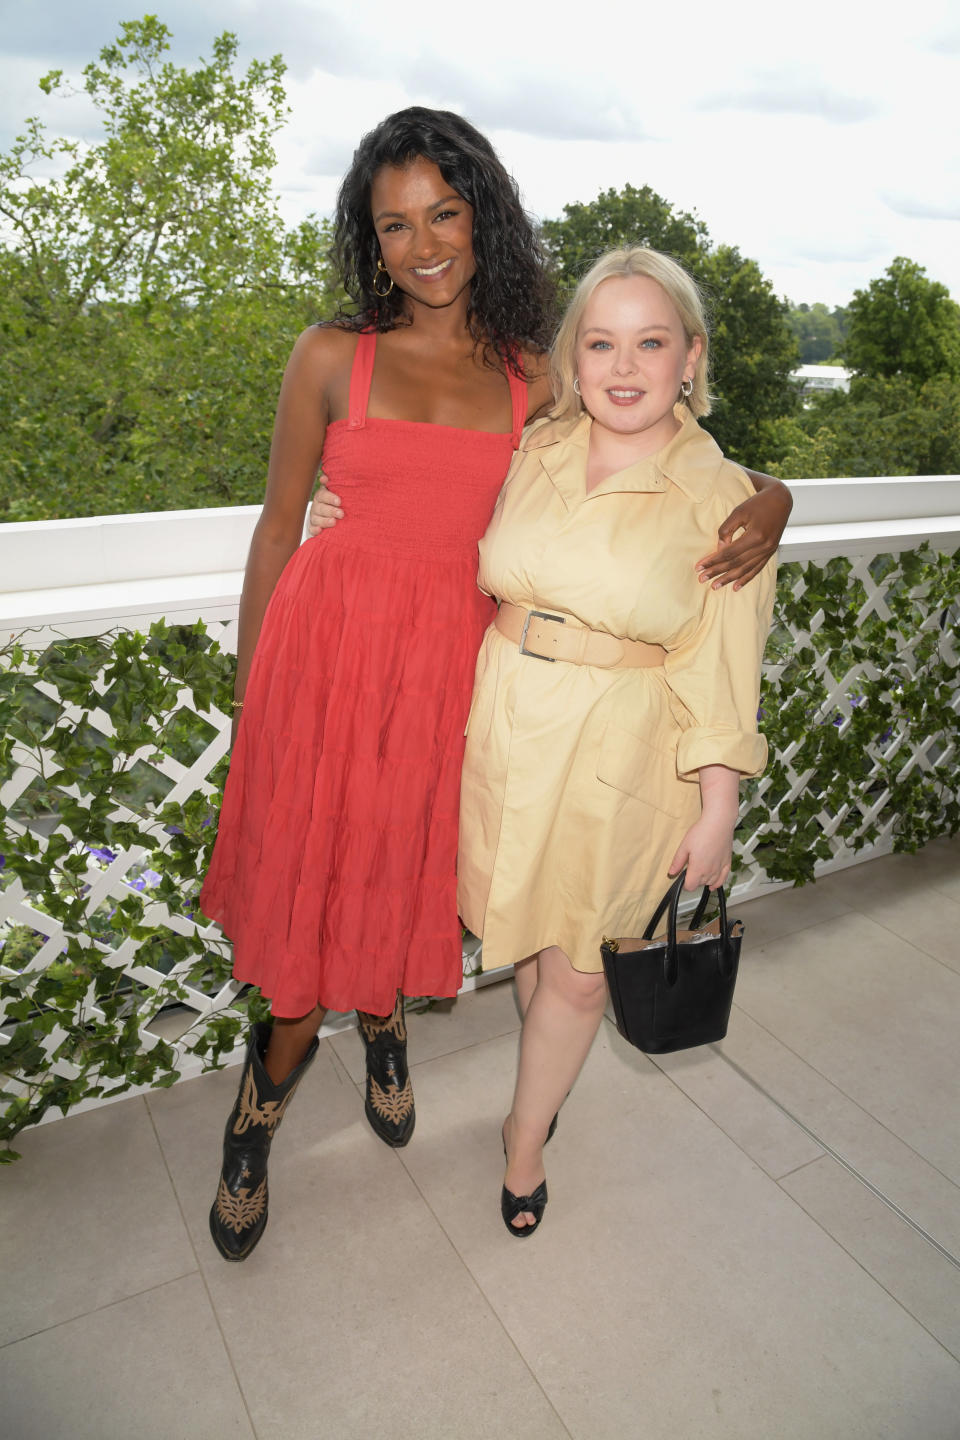 Simone Ashley in a sleeveless dress with cowboy boots stands next to Nicola Coughlan in a belted trench dress holding a black handbag; both are smiling